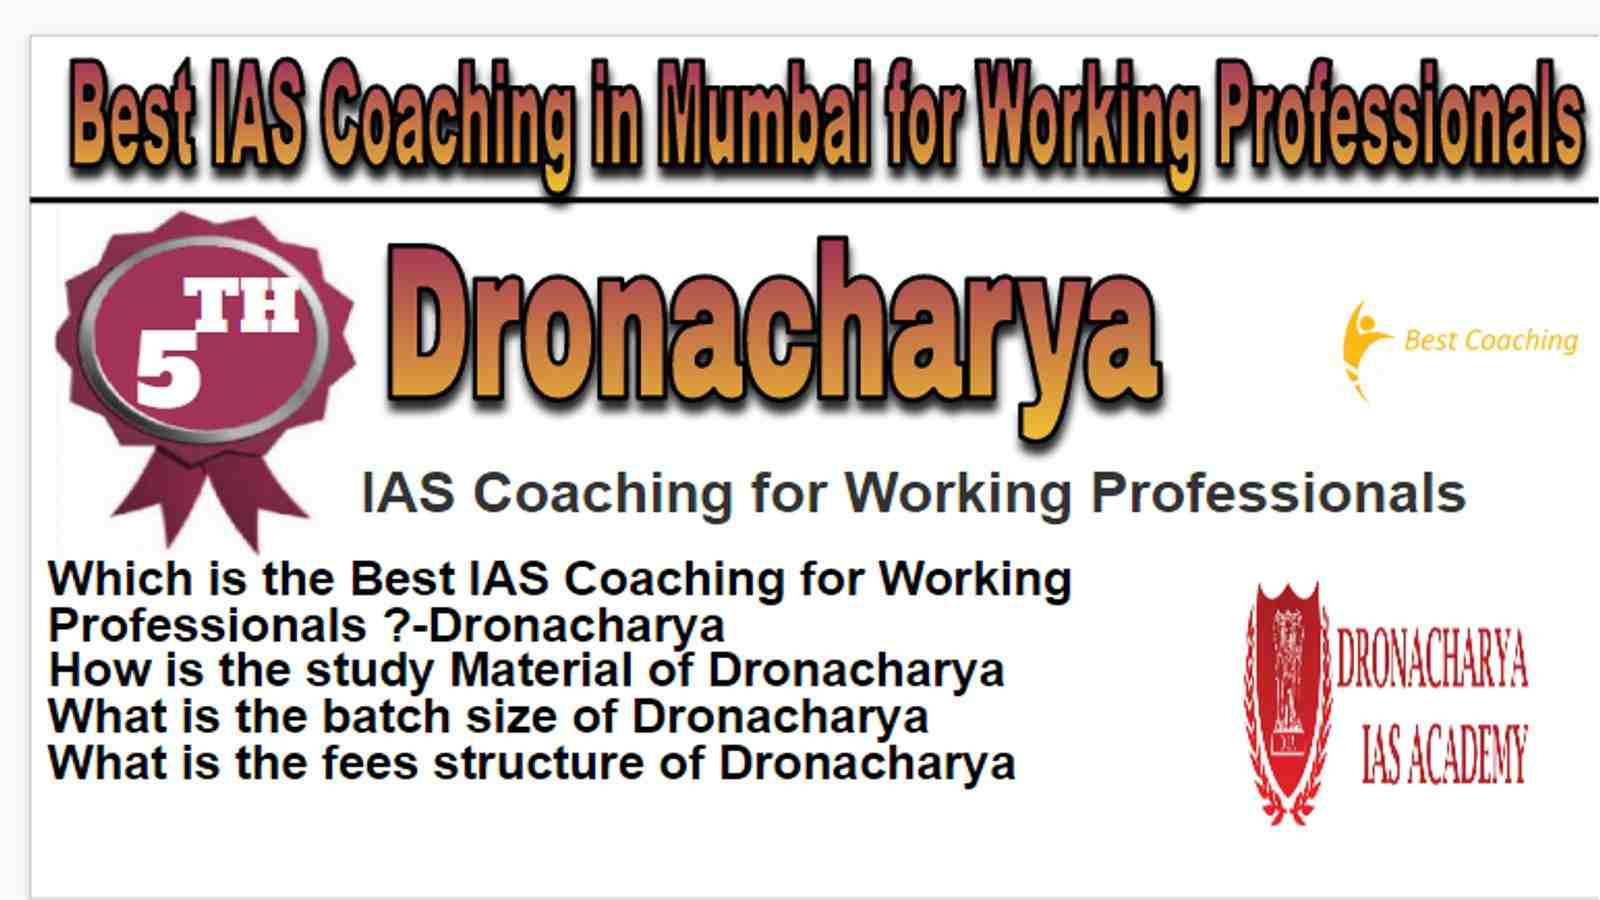 Rank 5 Best IAS Coaching in Mumbai for Working Professionals